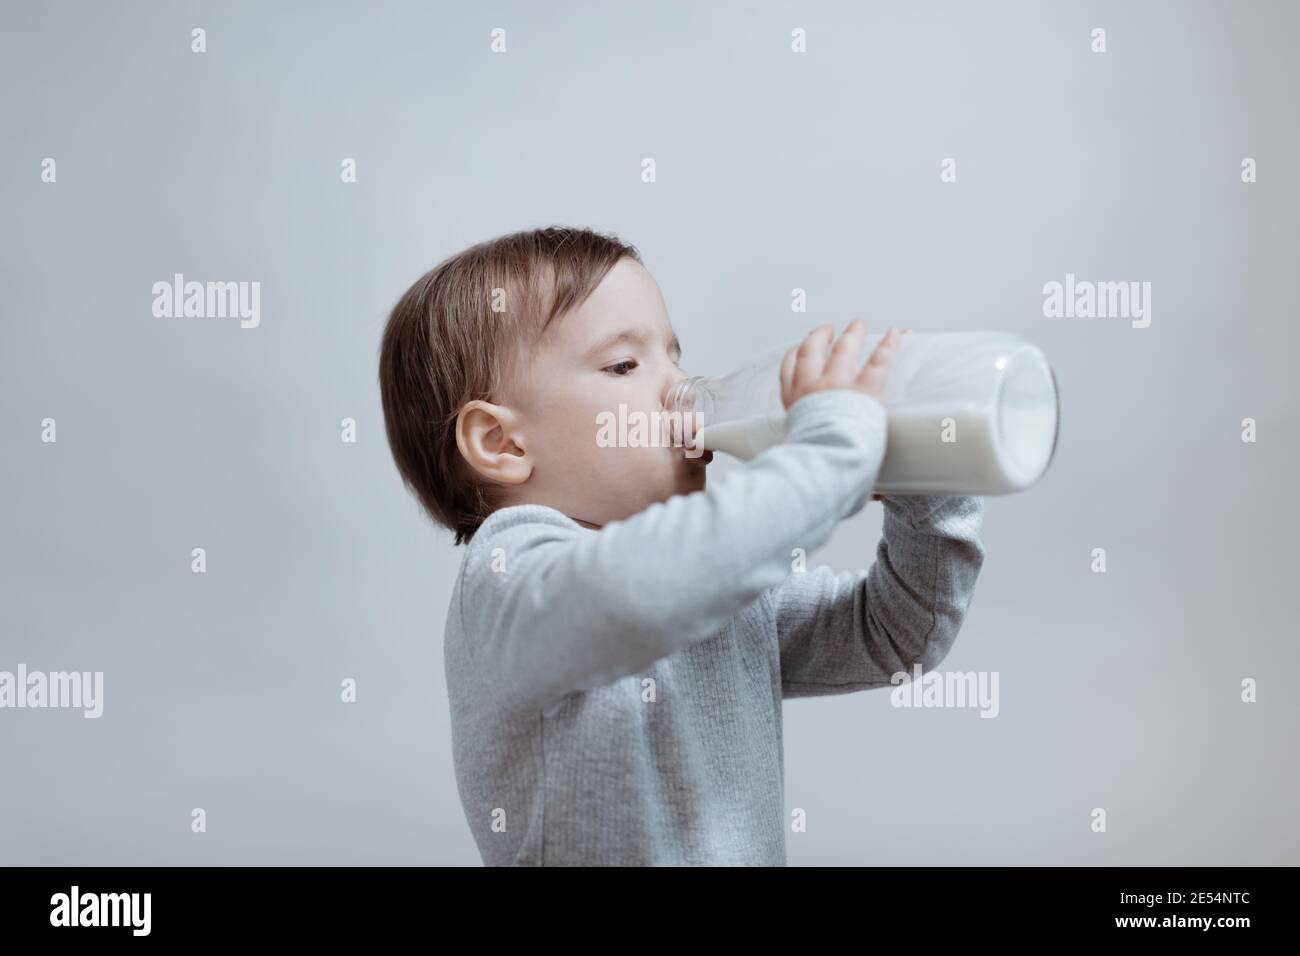 A little boy drinking milk against grey background. A portrait of a young child holding a glass bottle of milk. Stock Photo